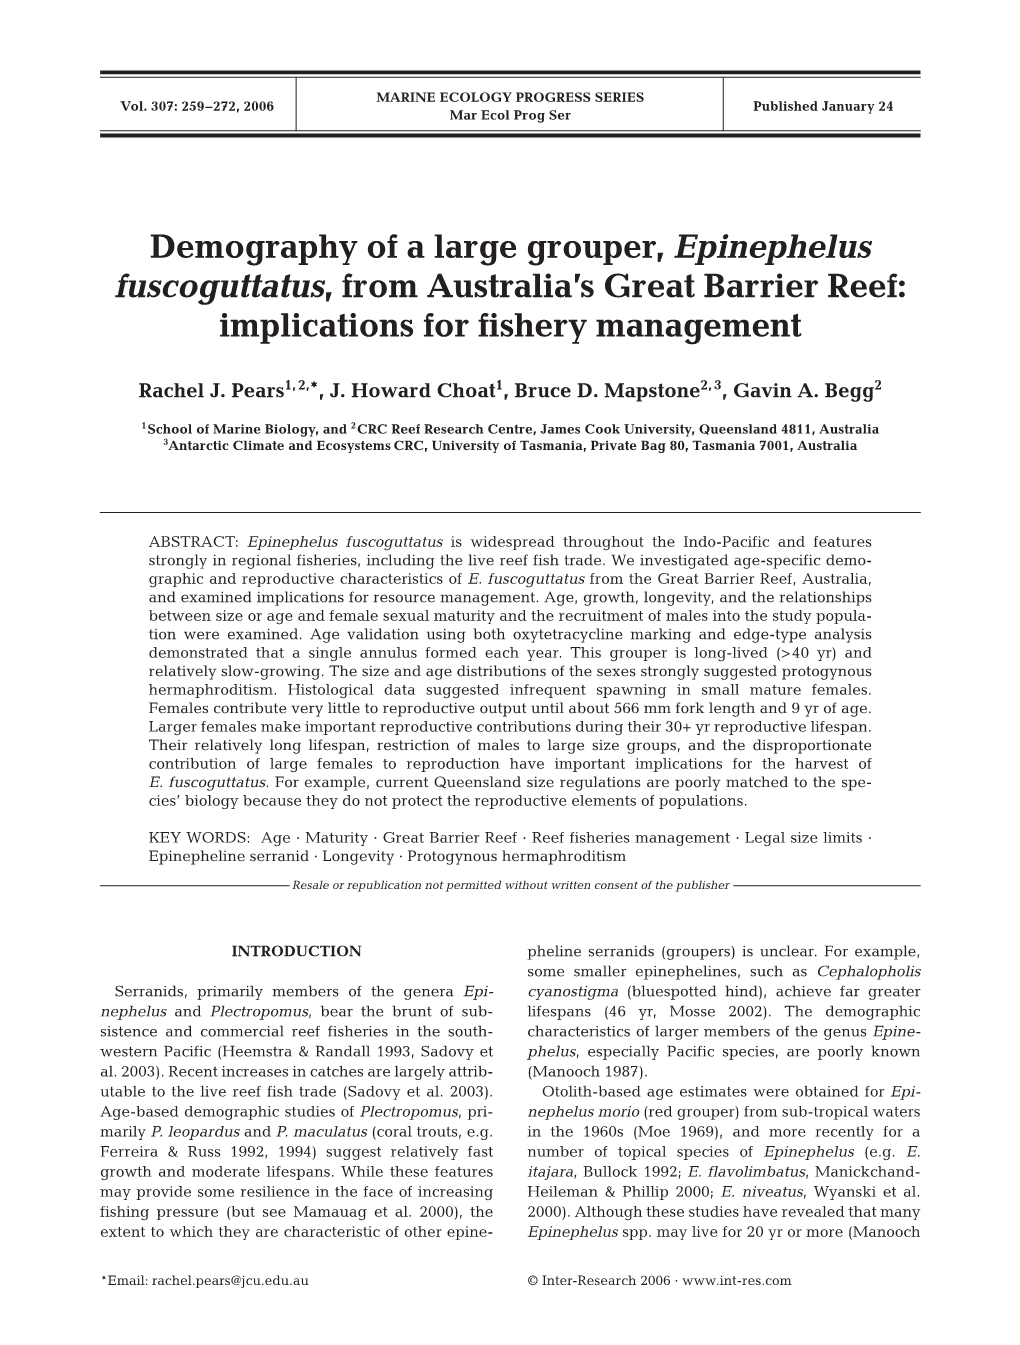 Demography of a Large Grouper, Epinephelus Fuscoguttatus, from Australia’S Great Barrier Reef: Implications for Fishery Management